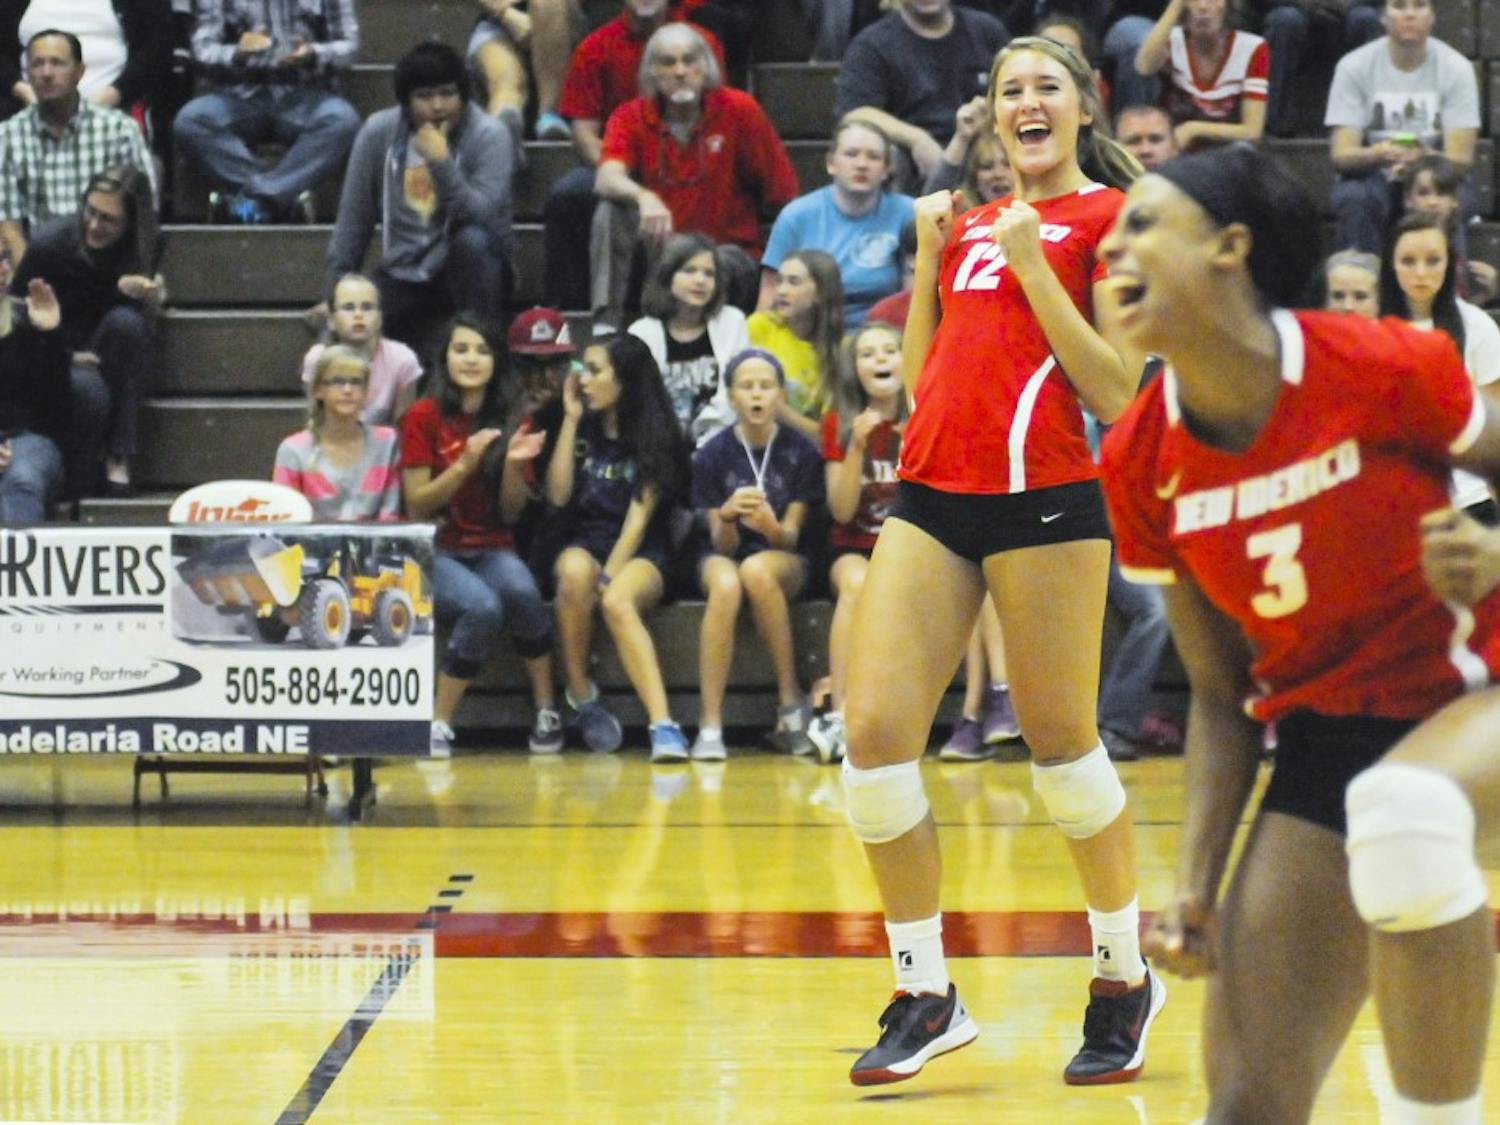 Lobos sophomore outside hitter/middle blocker Cassie House and redshirt senior right side hitter Chantale Riddle, left to right, react after scoring a point during the game against UC Irvine at Johnson Gym on Saturday night. The Lobos defeated UC Irvine 3-1.